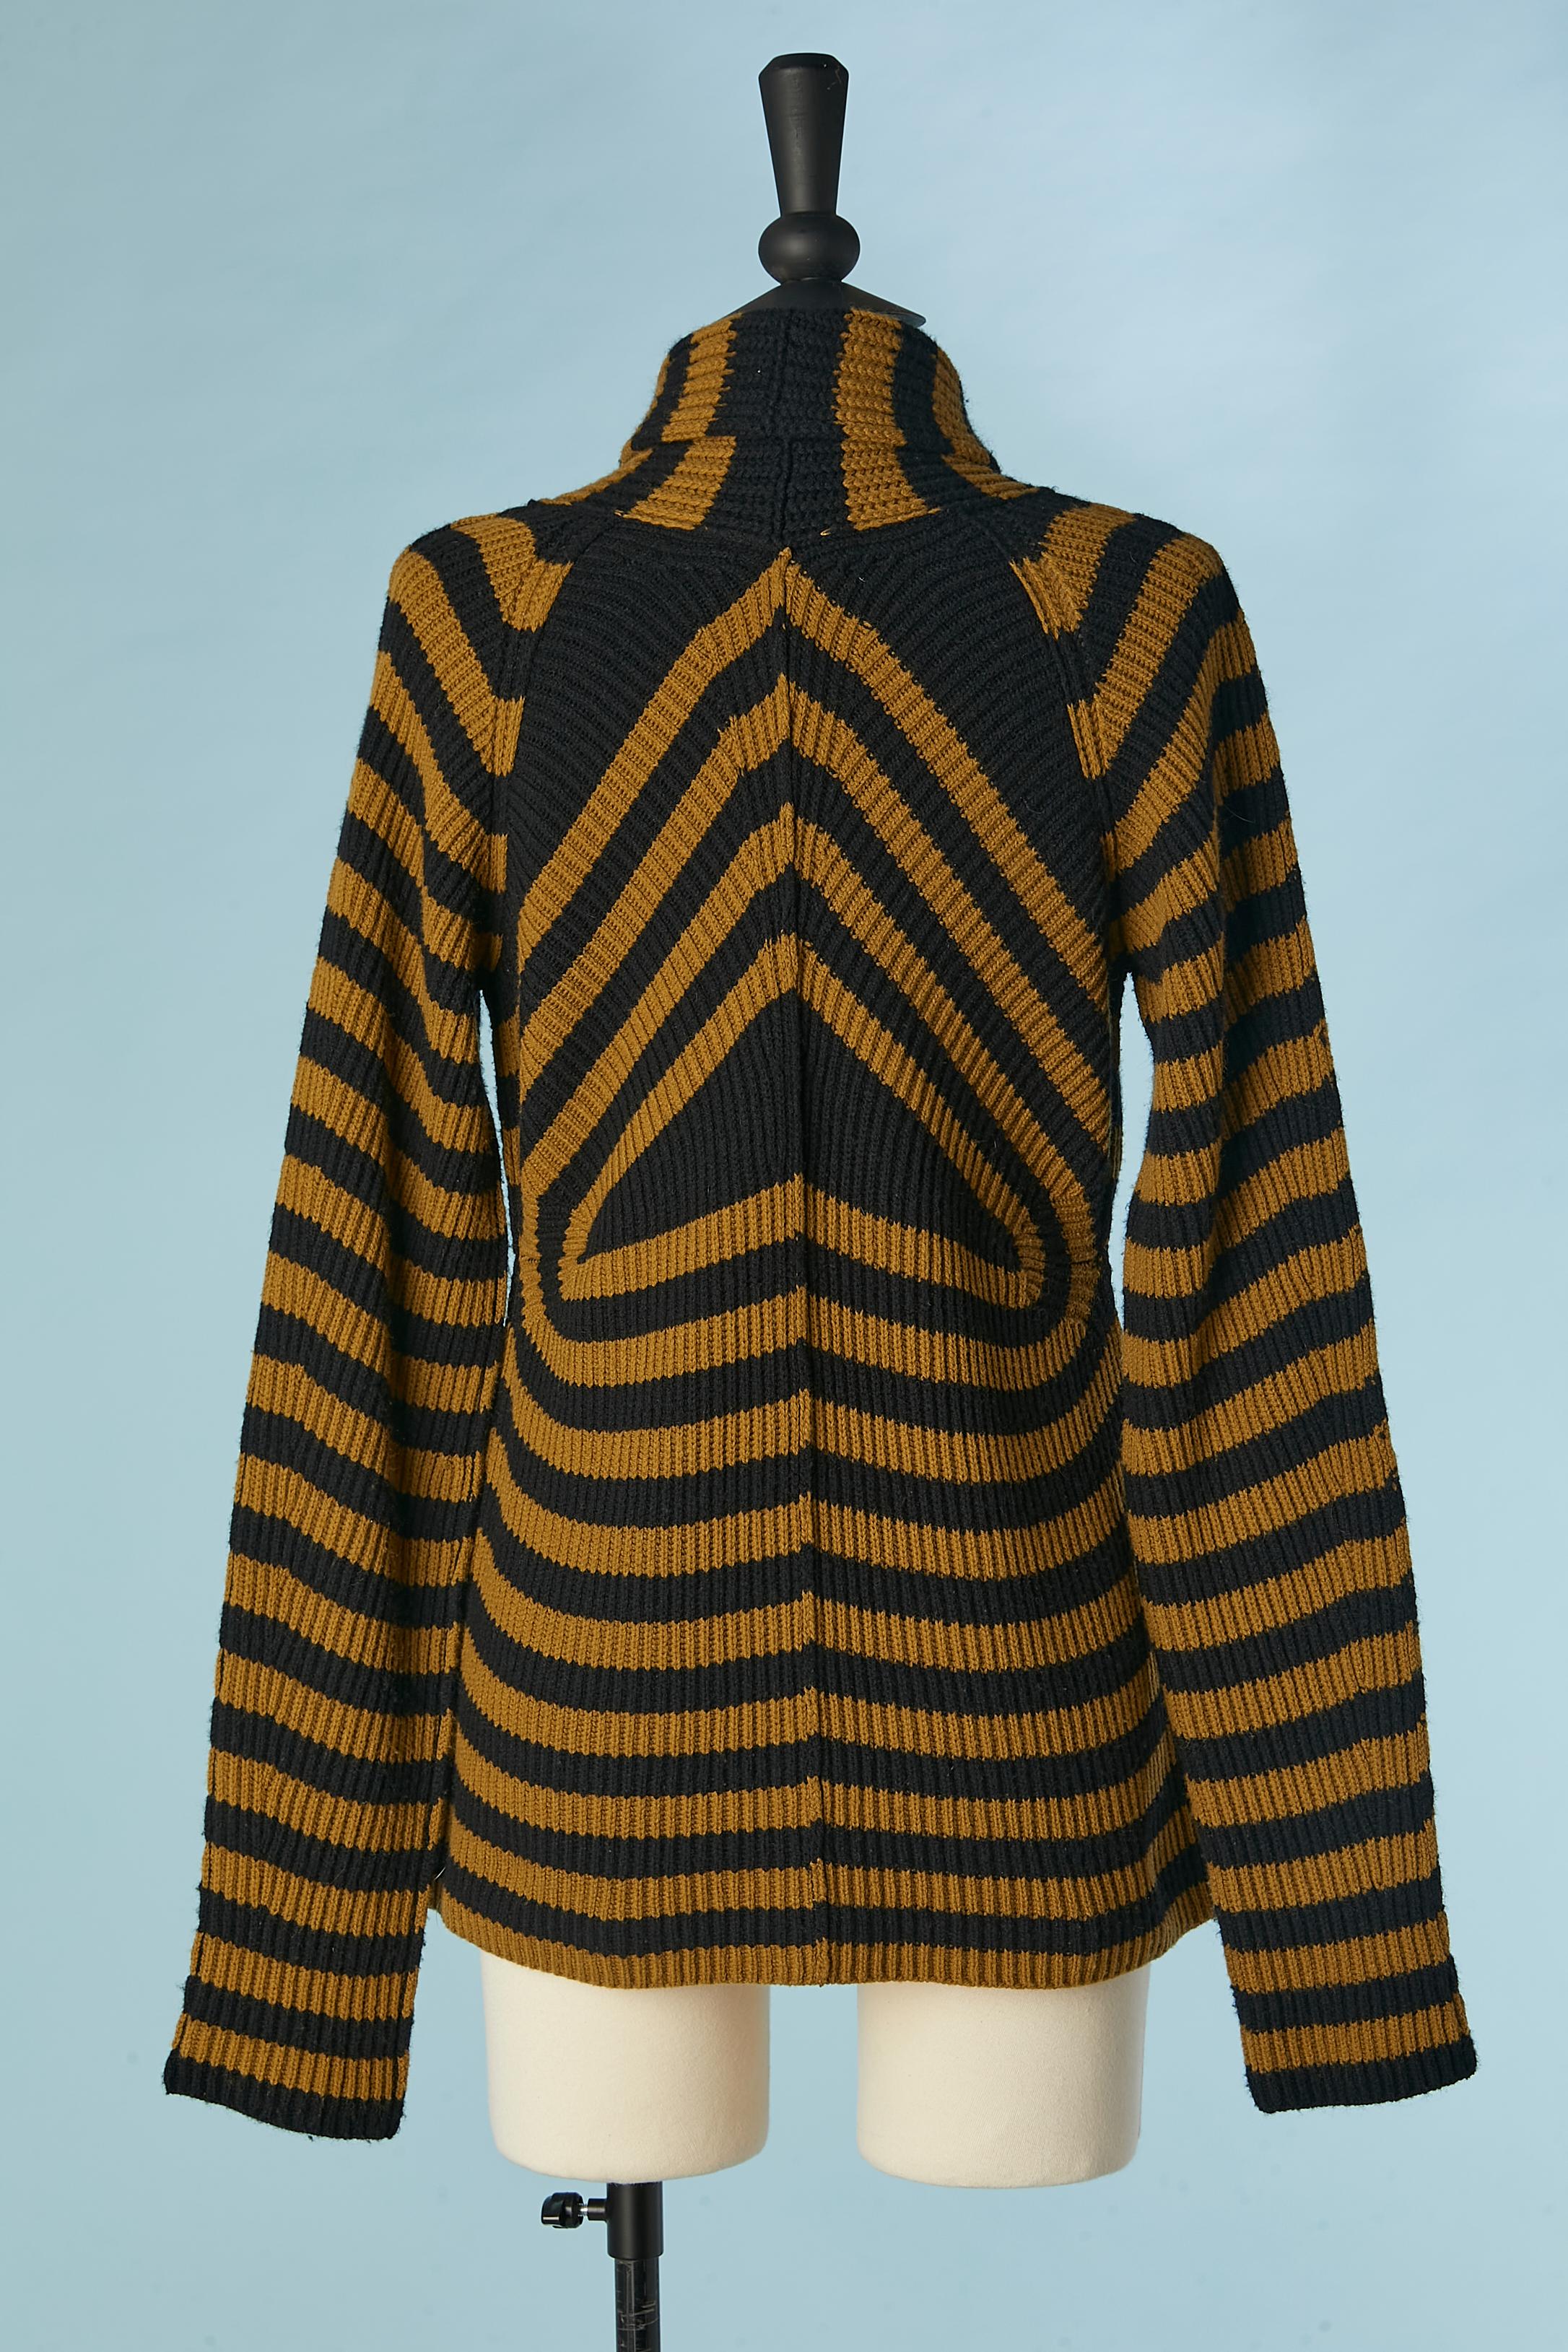 Kaki and black striped wool and cashmere cardigan with scarf Sonia Rykiel  For Sale 3